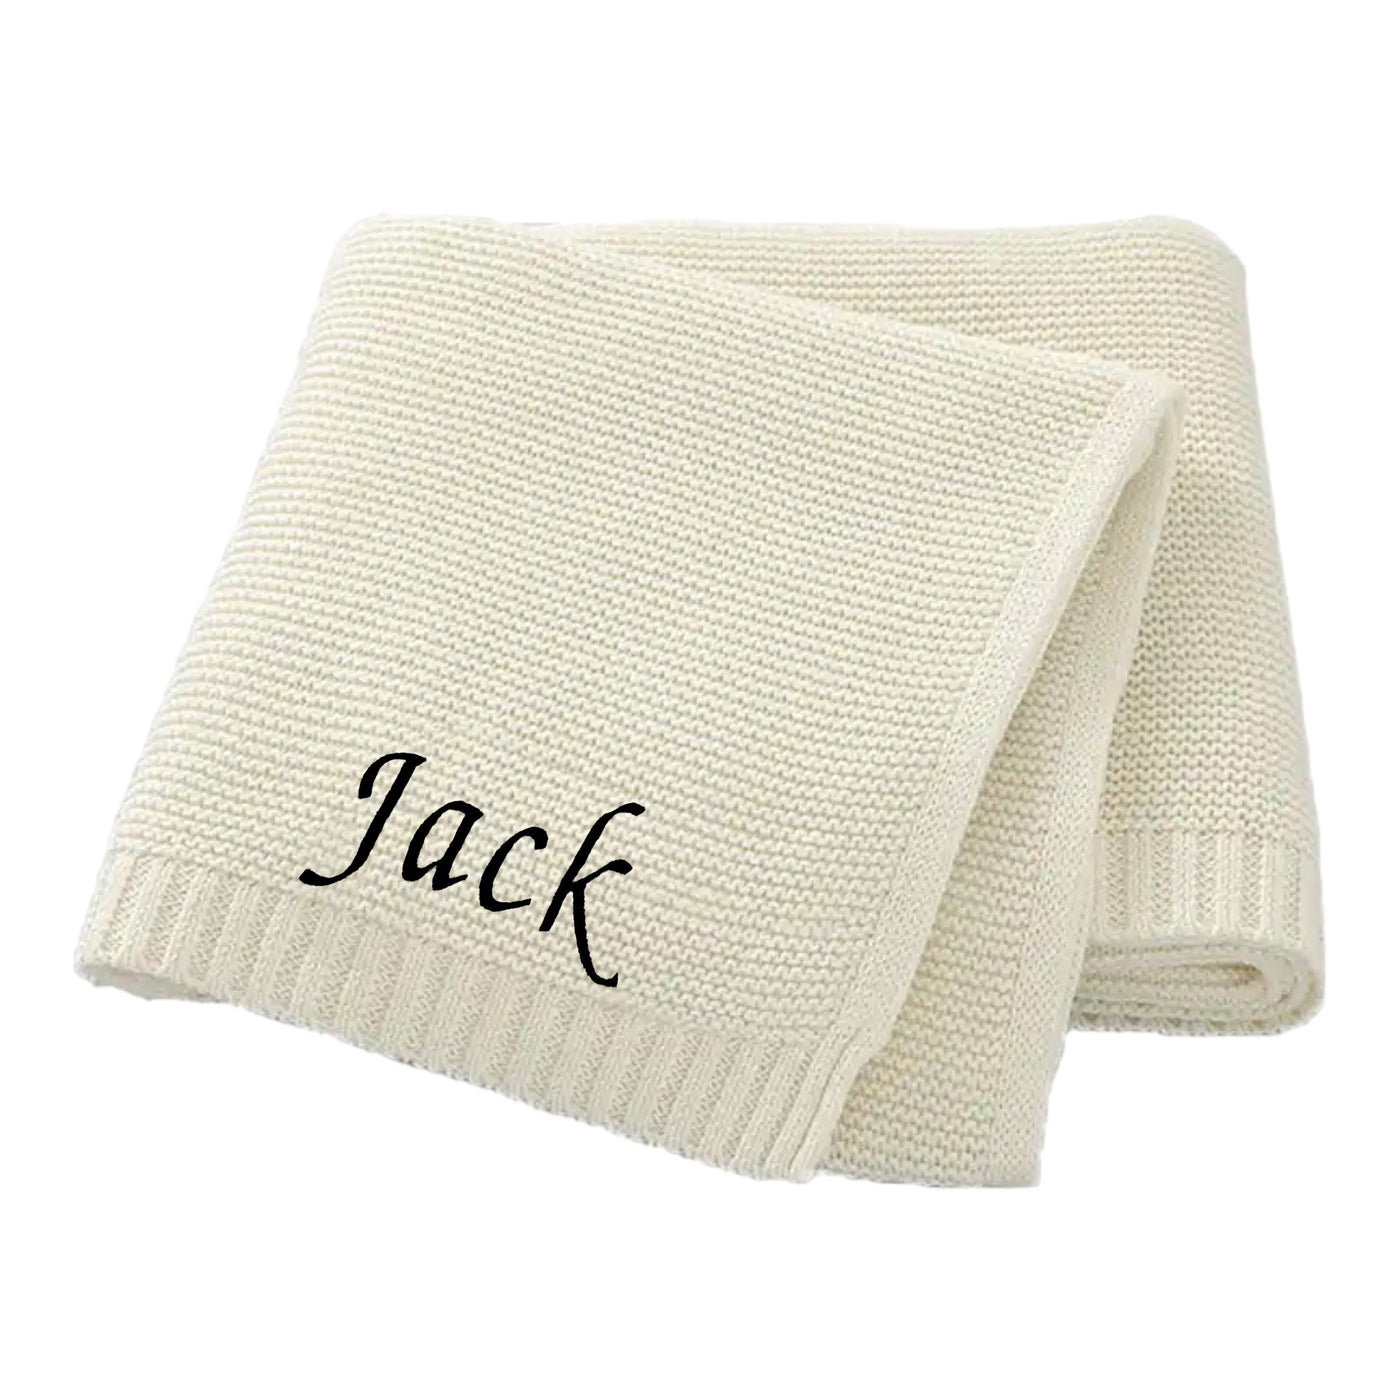 PERSONALISED BABY COTTON KNITTED BLANKET WHITE